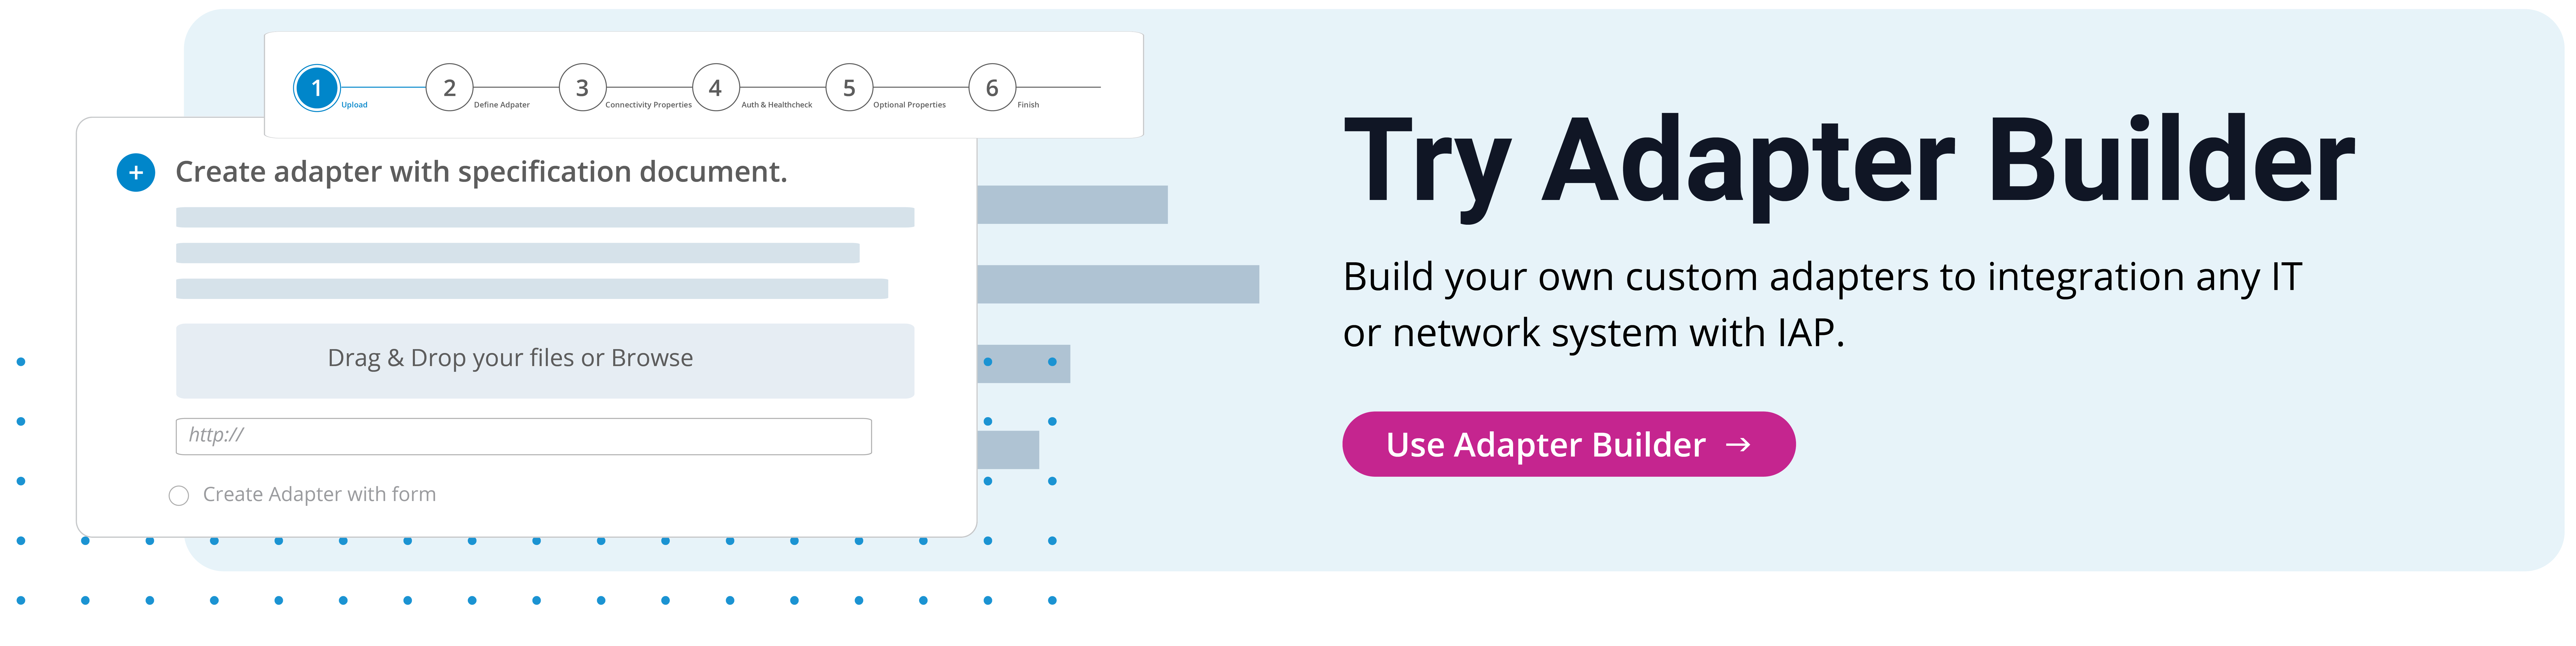 Try Adapter Builder